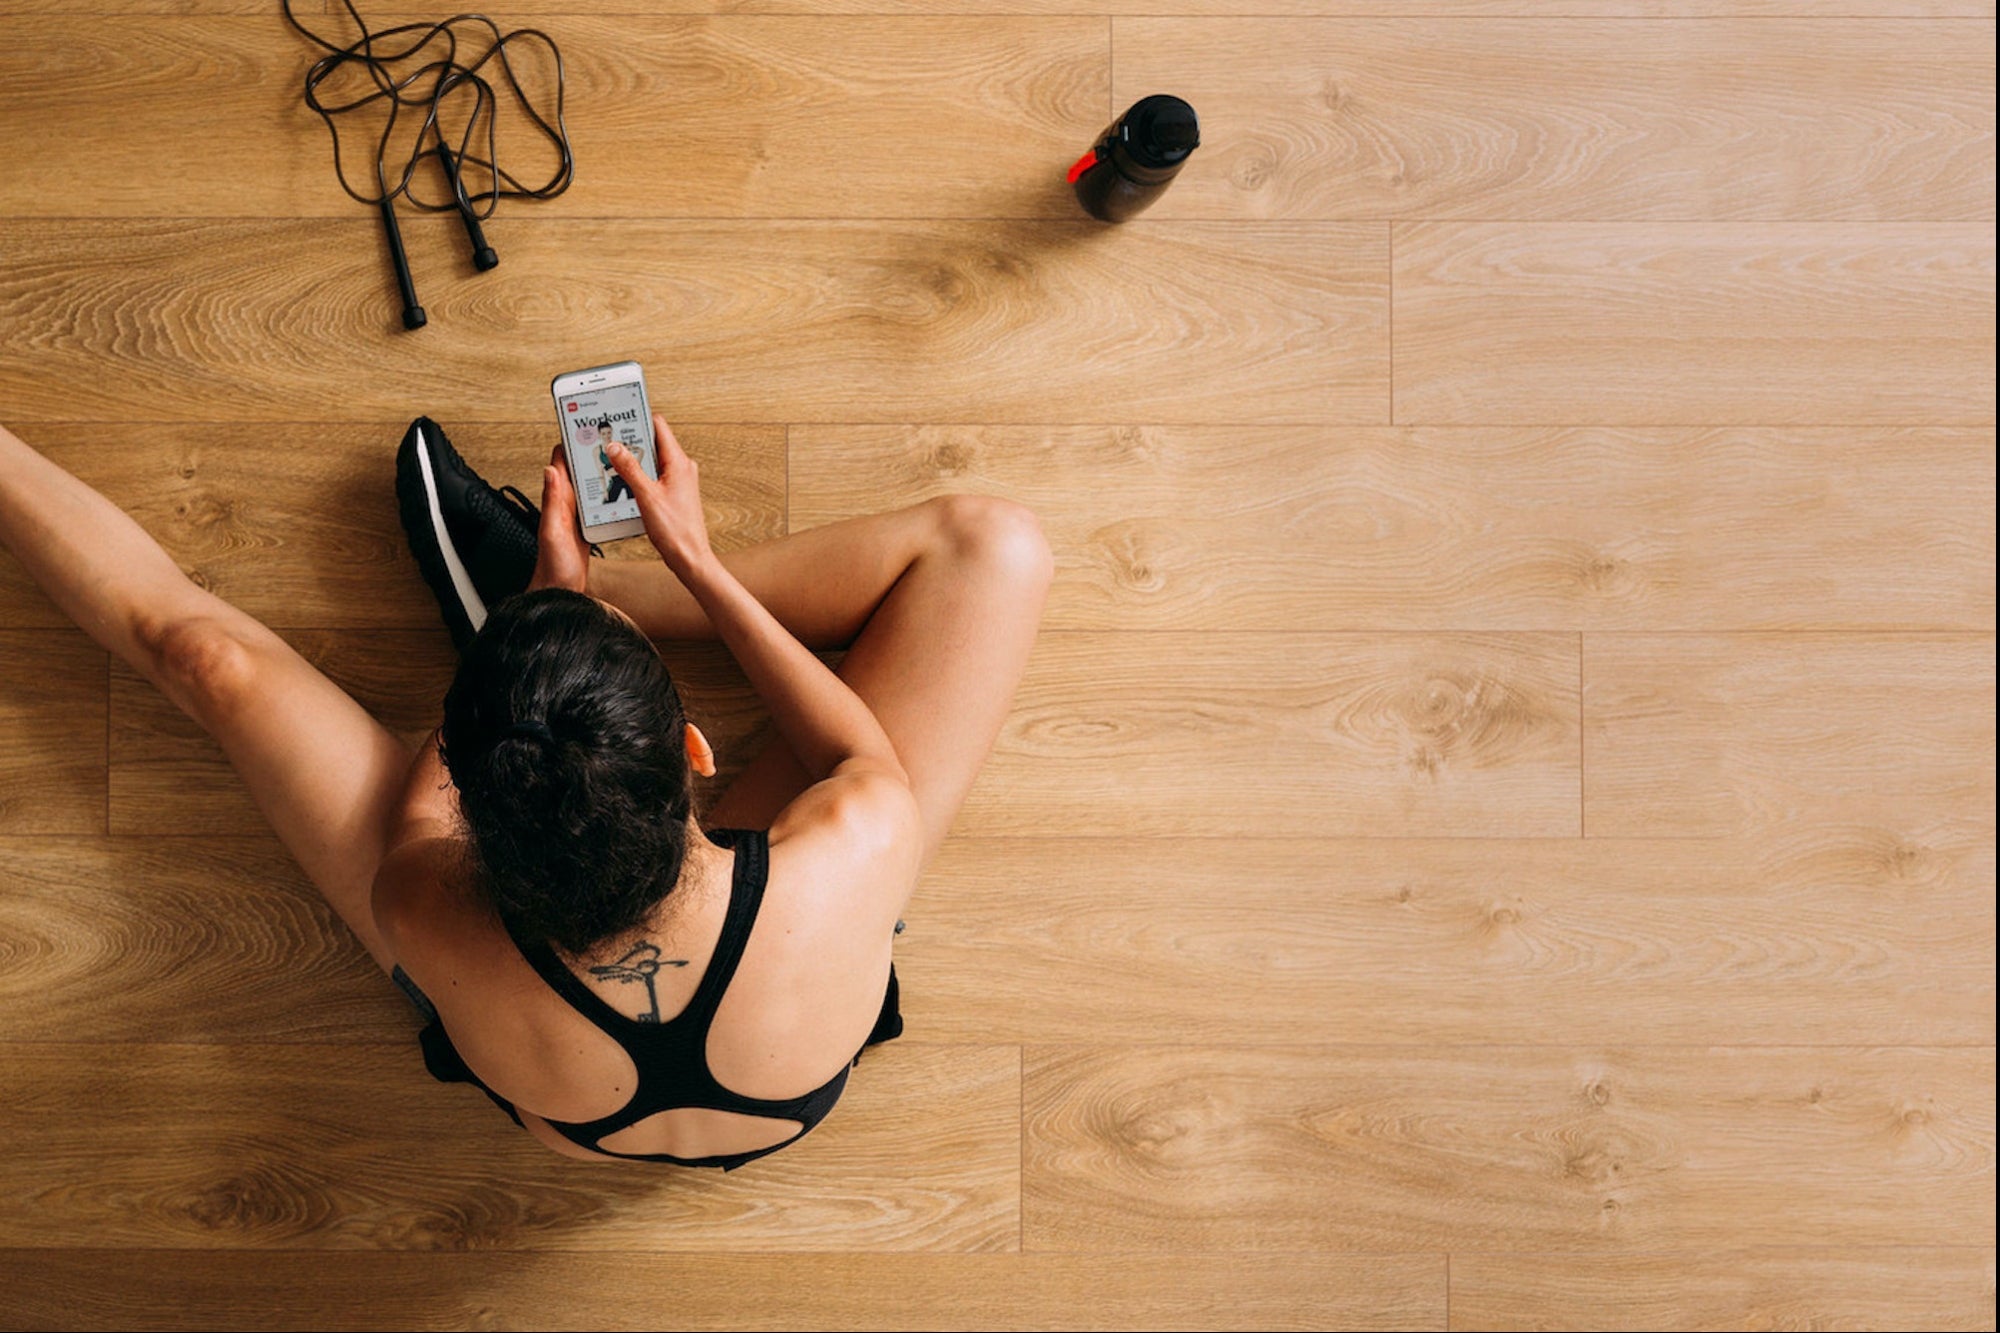 This Highly-Rated Fitness App Helps You Start Your New Year's Resolution